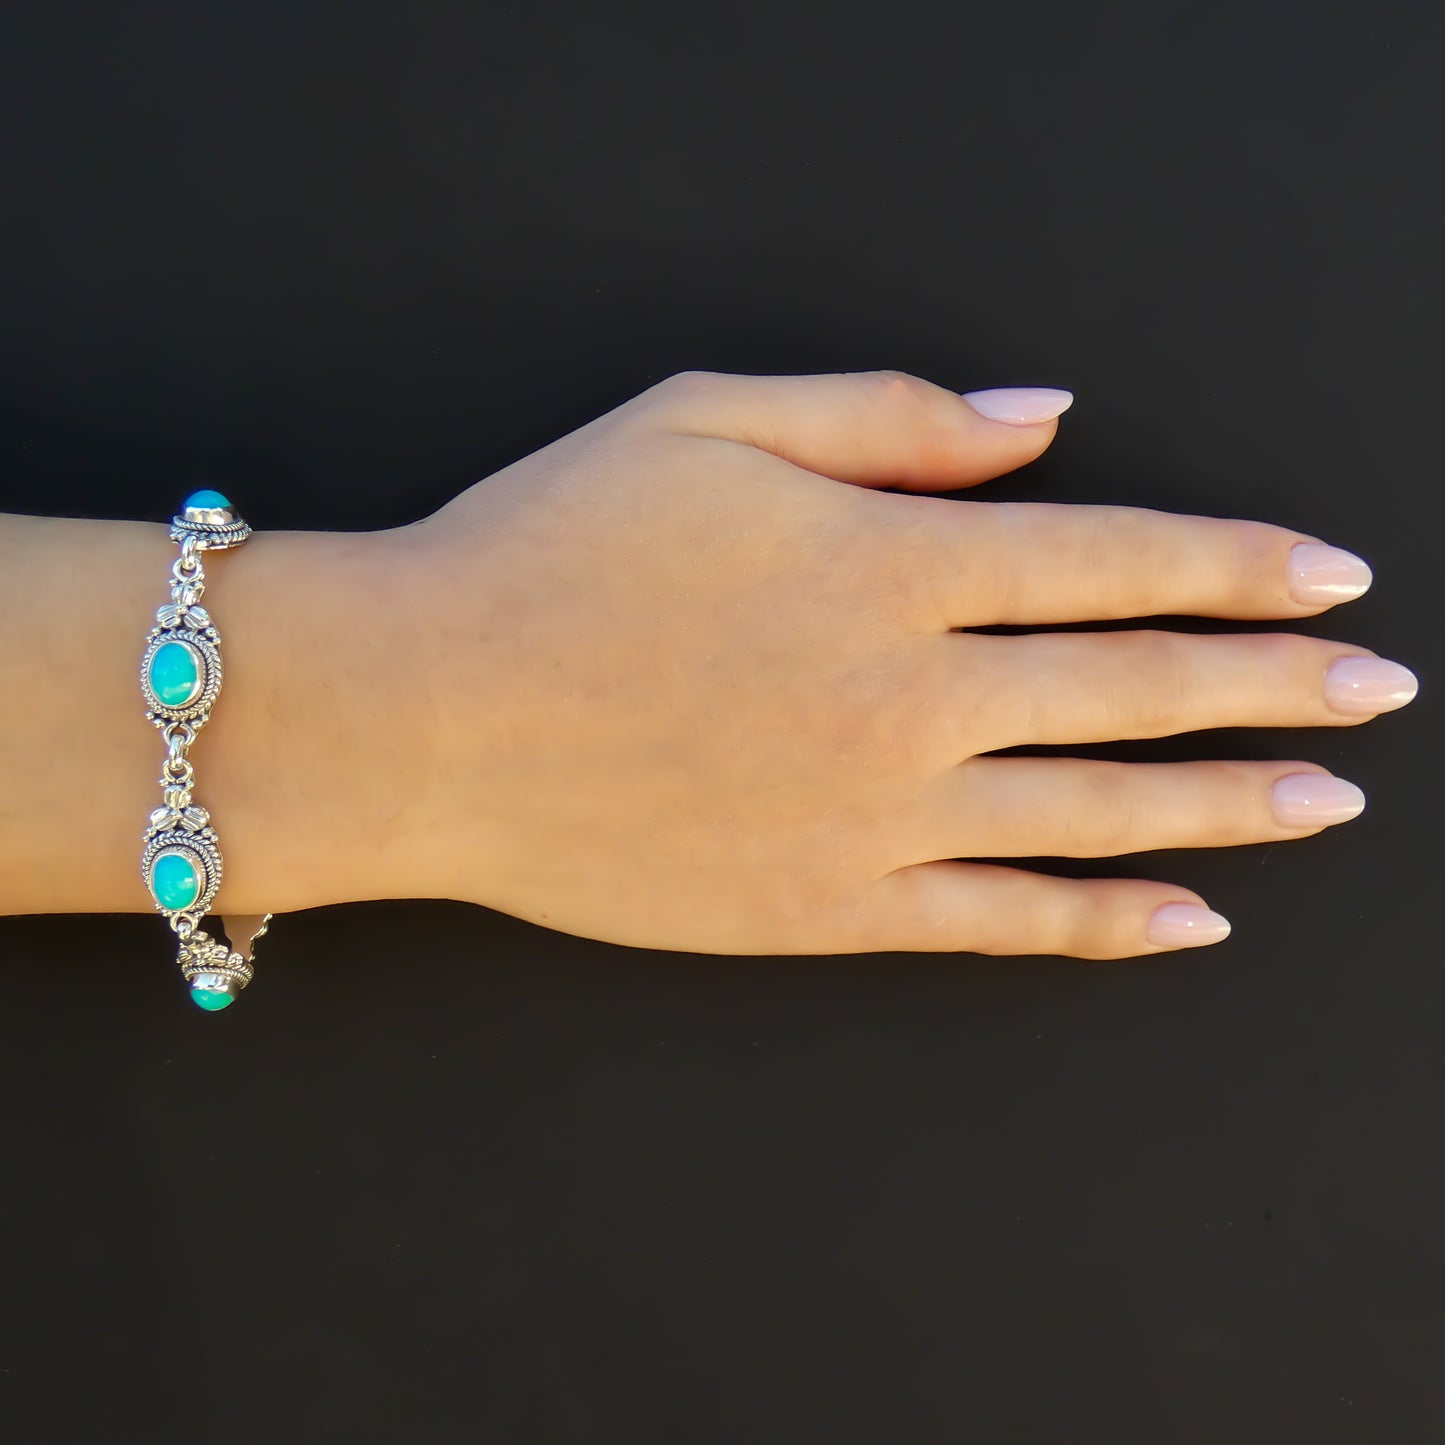 Woman wearing a silver bracelet with amazonite gemstones and floral accents.